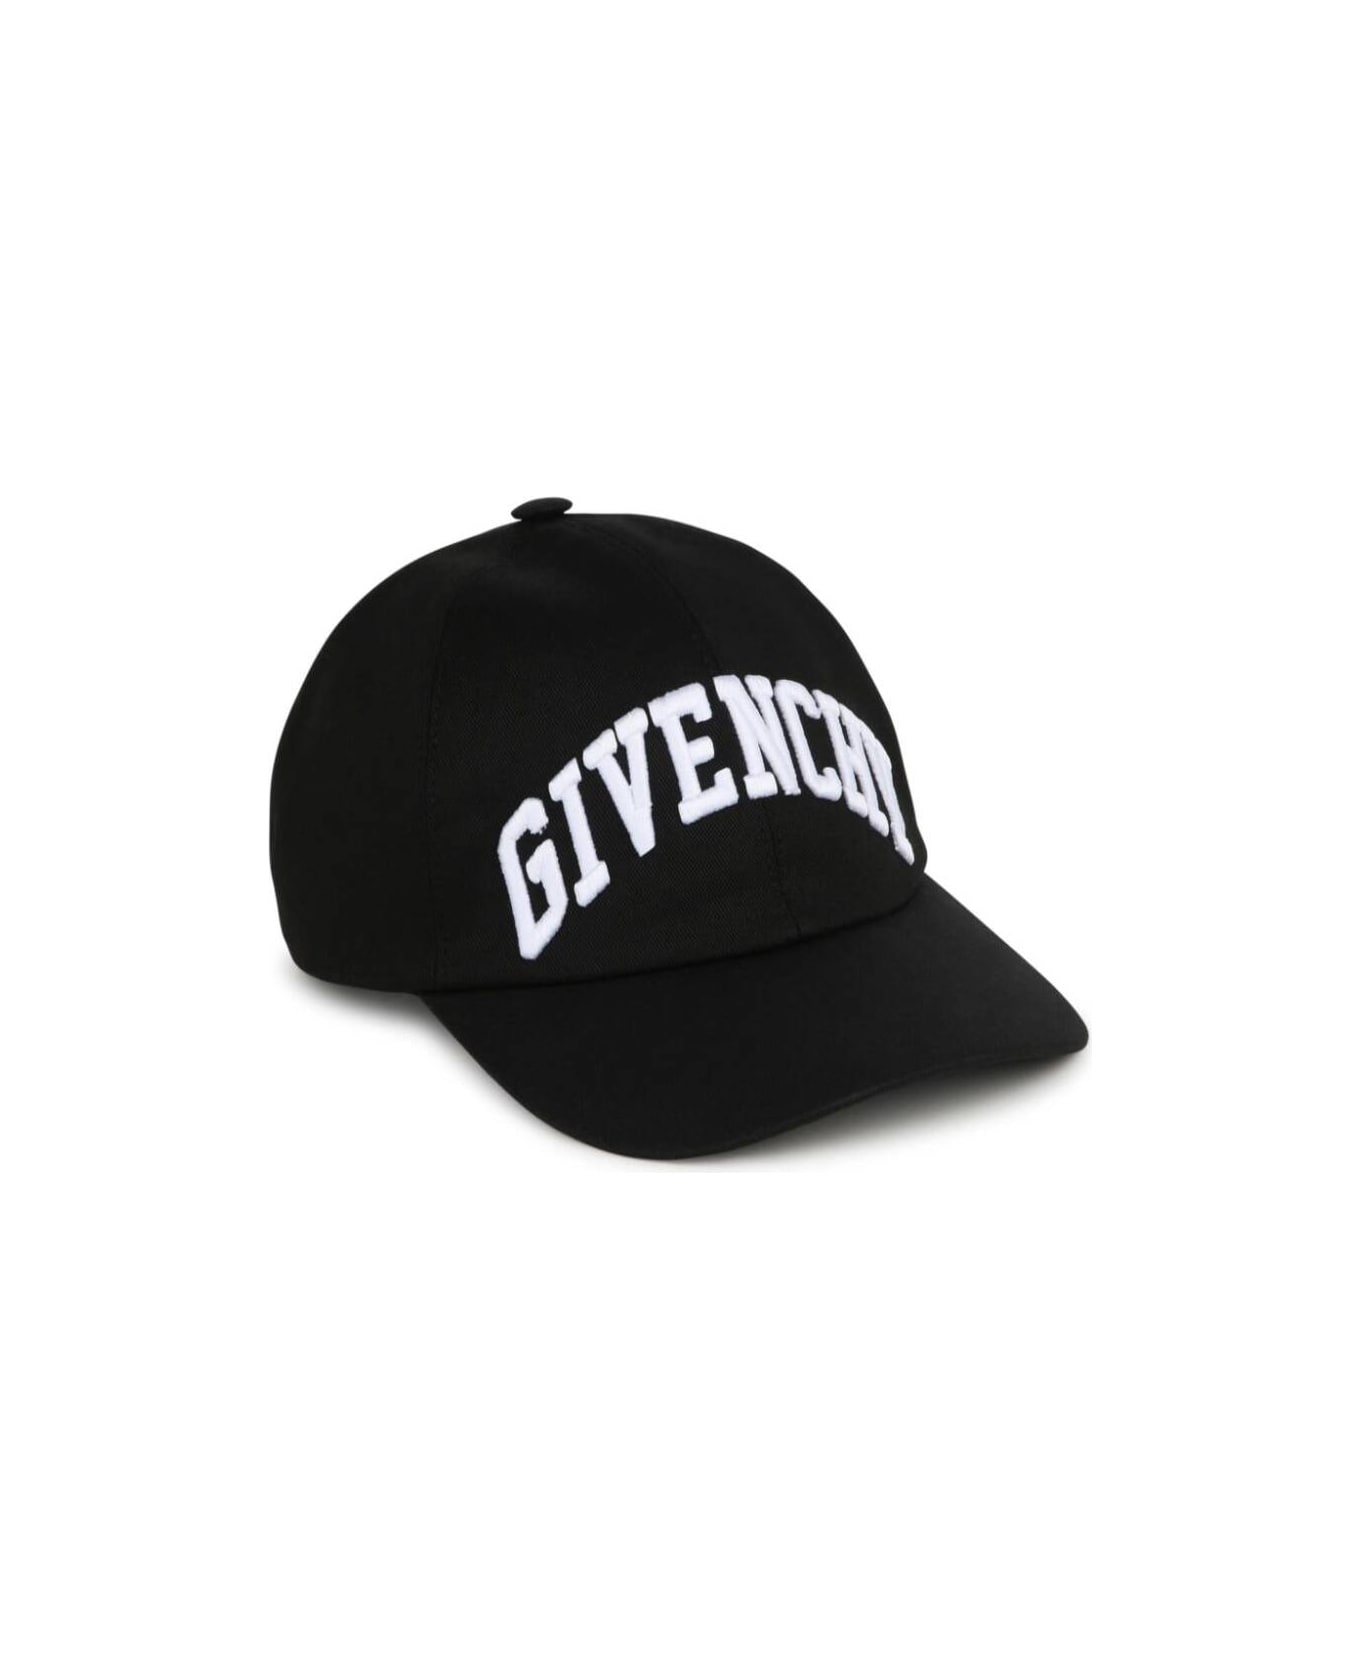 Givenchy Black Baseball Cap With Logo Lettering Embroidery In Cotton Girl - Black